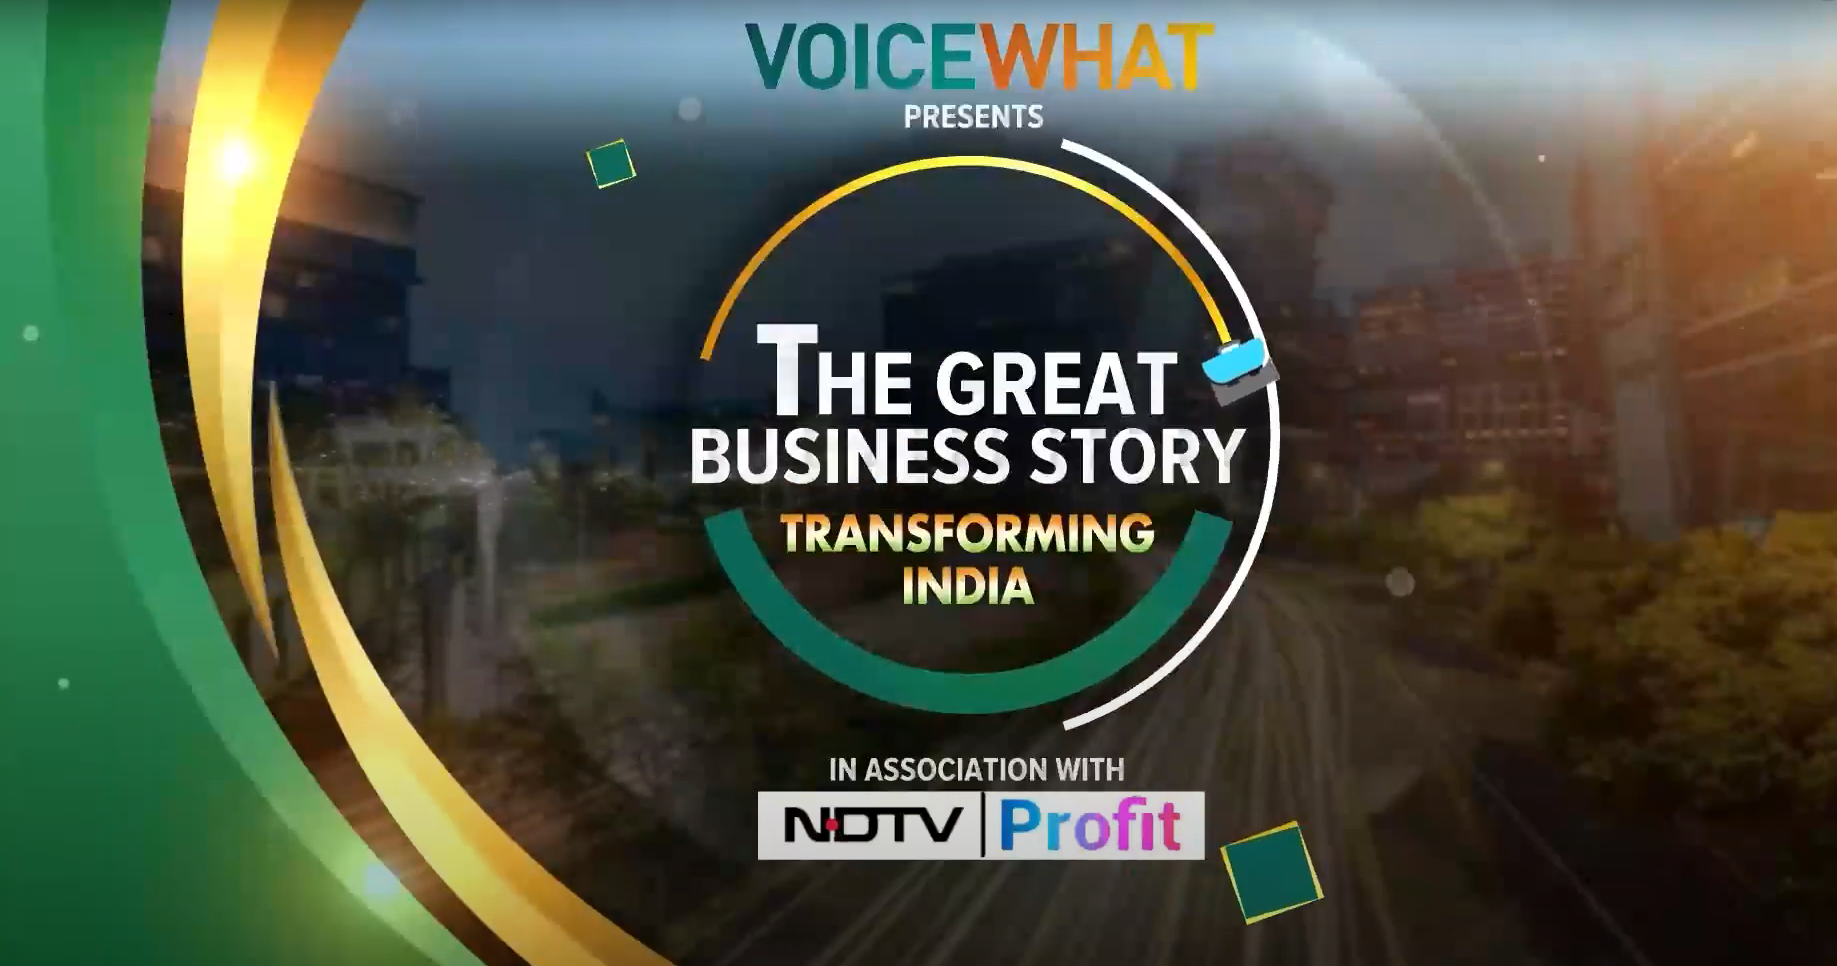 Genetic Testing Solutions with Dr. Vedam Ramprasad, CEO of Medgenome | NDTV Profit